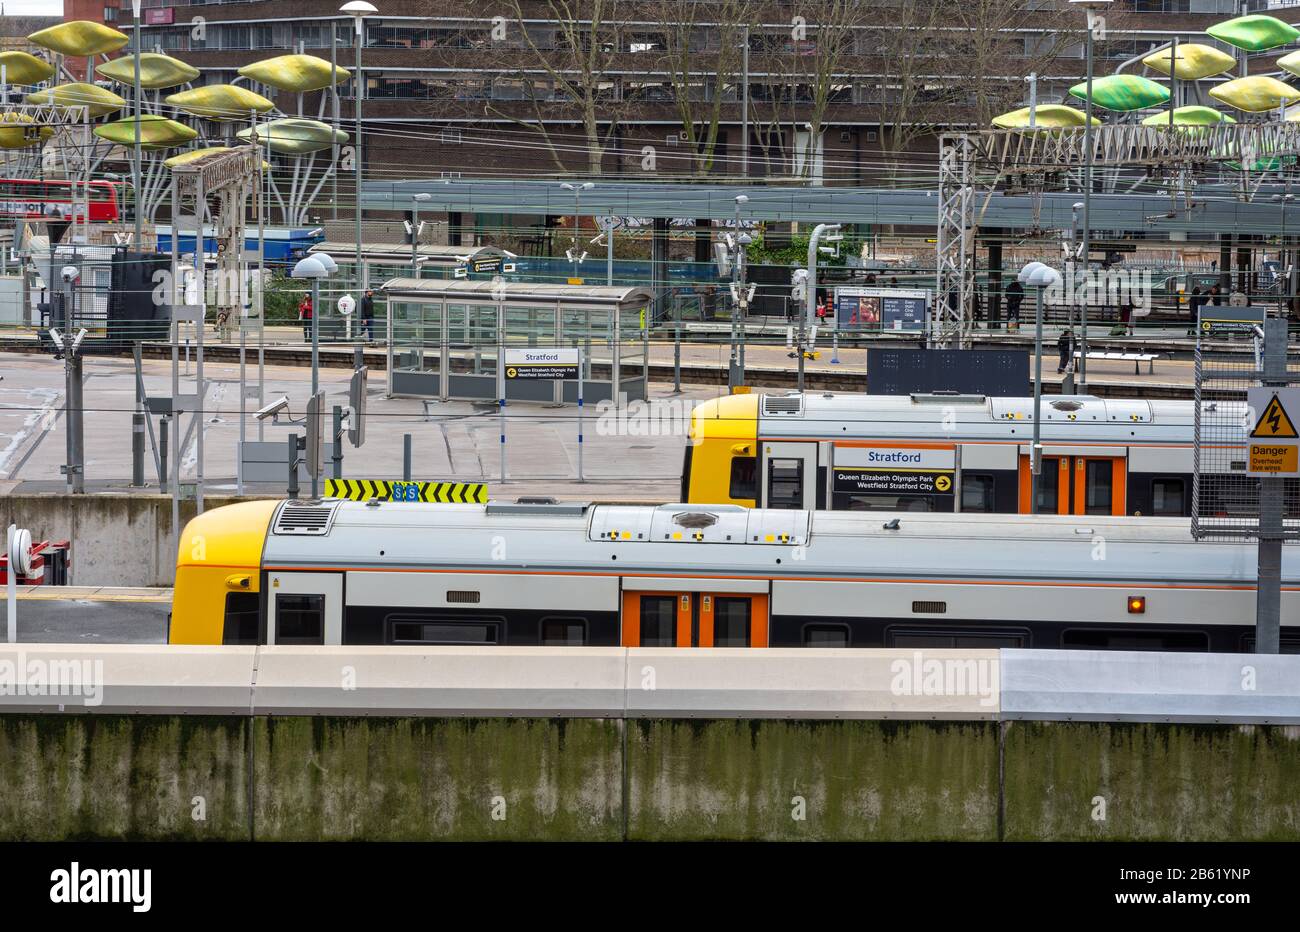 London, England, UK - January 17, 2020: A pair of London Overground commuter trains stand at Stratford Station in east London. Stock Photo